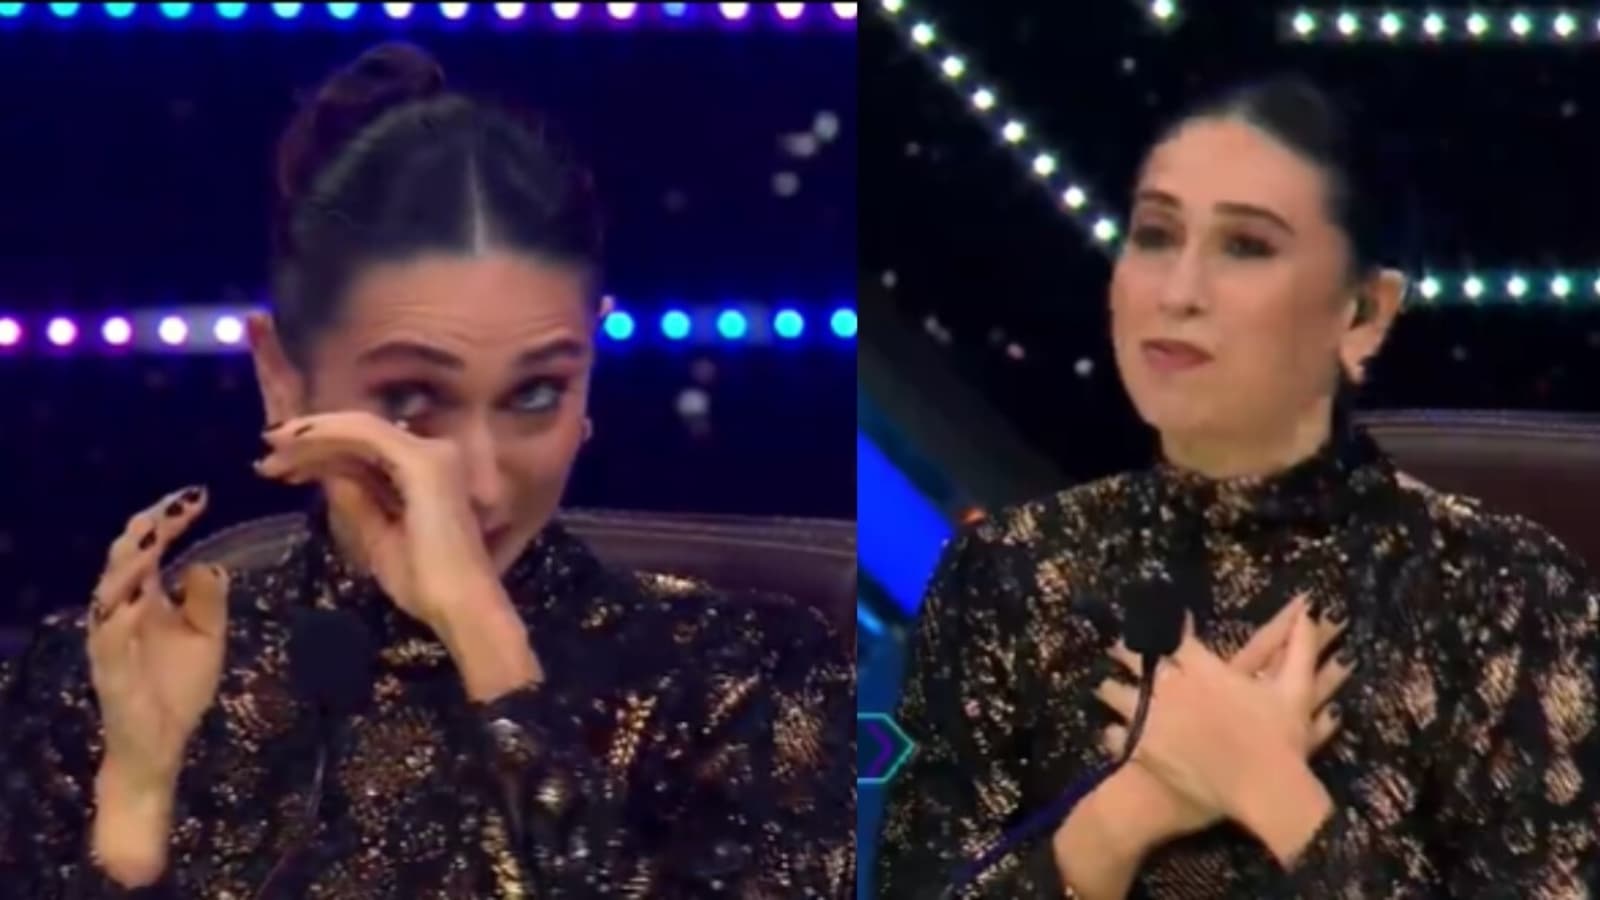 Karisma Kapoor, filling in for Shilpa Shetty, cries on Super Dancer 4 sets.  Here's why - Hindustan Times